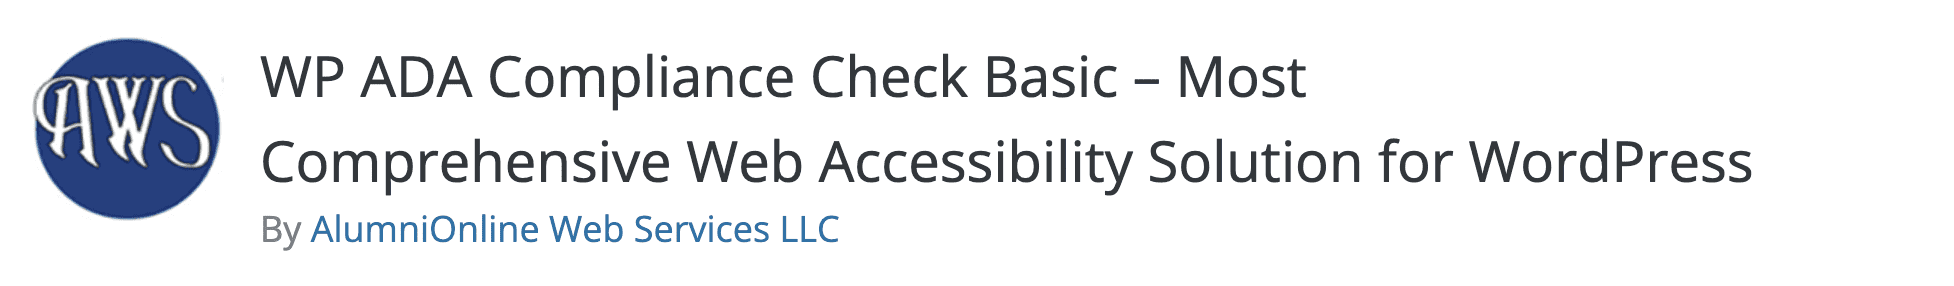 accessibility for WordPress